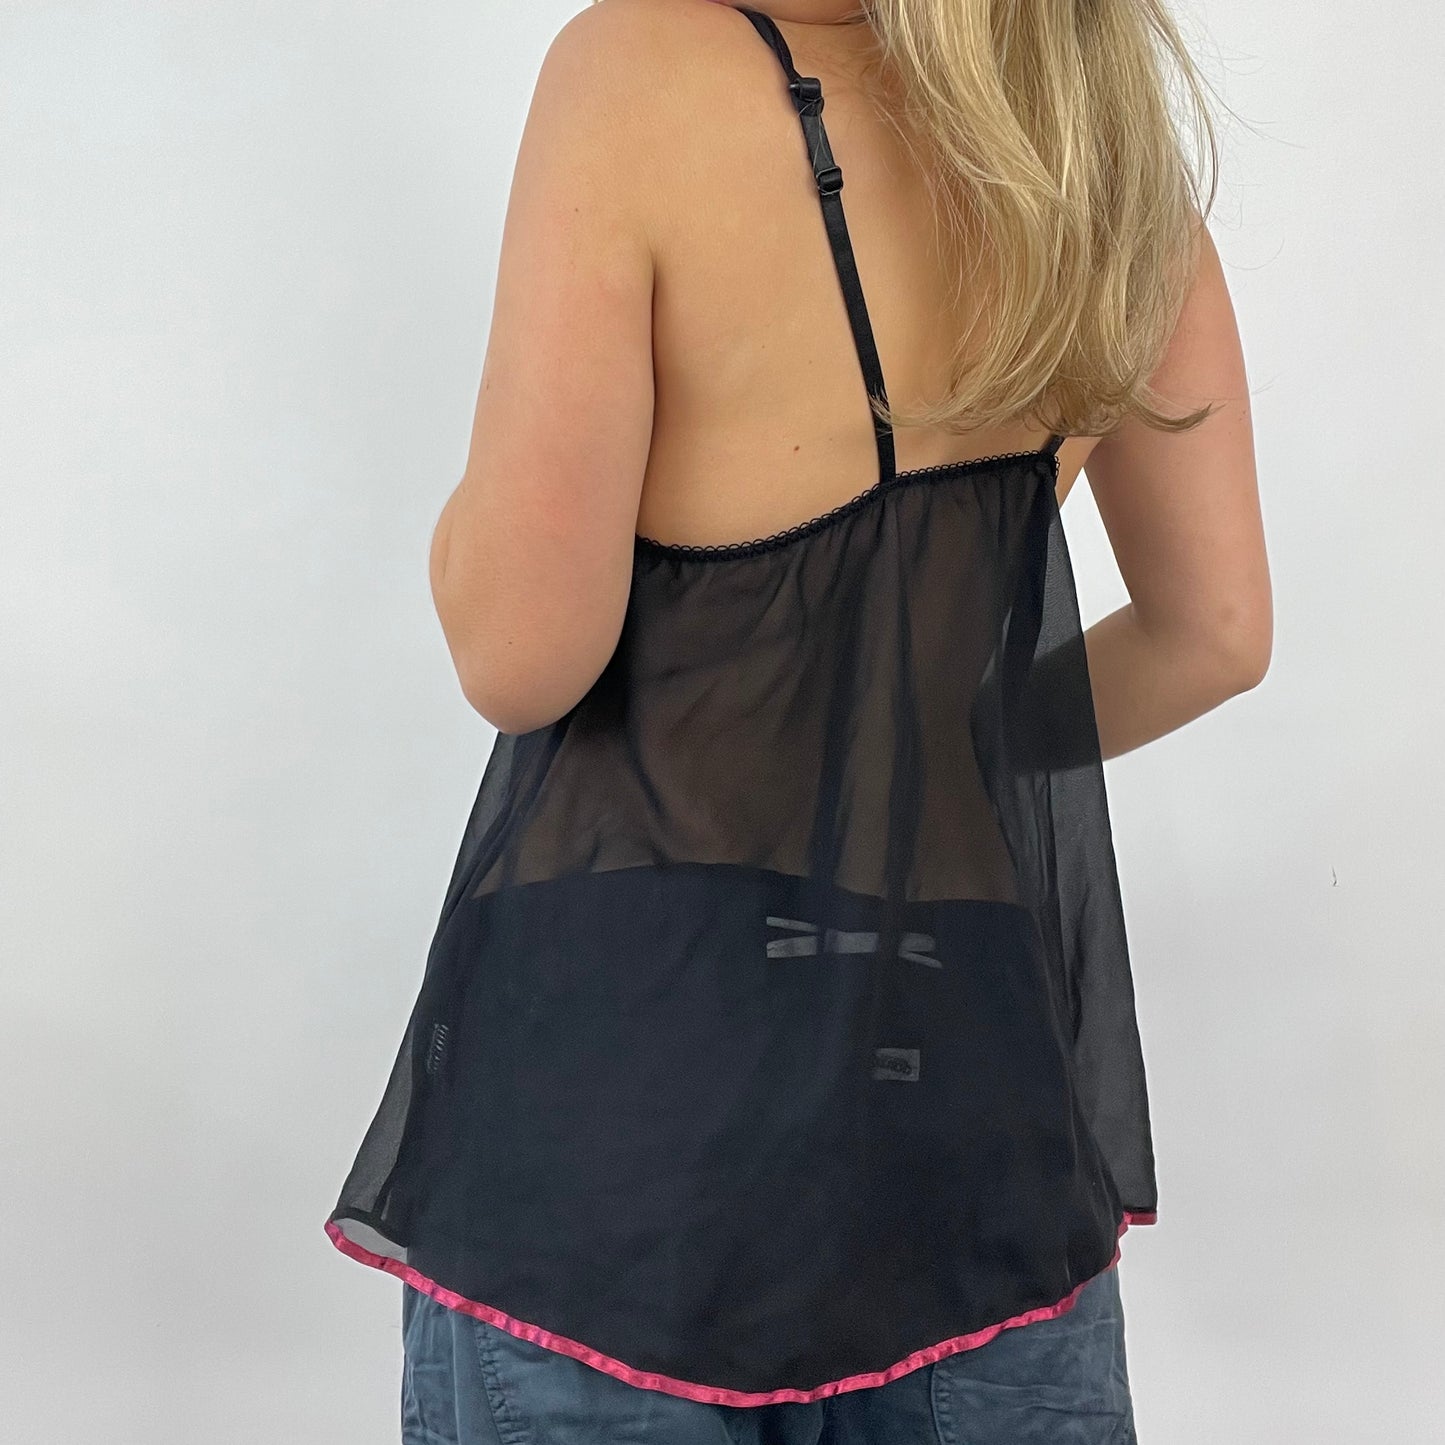 GIRL CORE DROP | small black lingerie style top with lace bust and pink ribbon